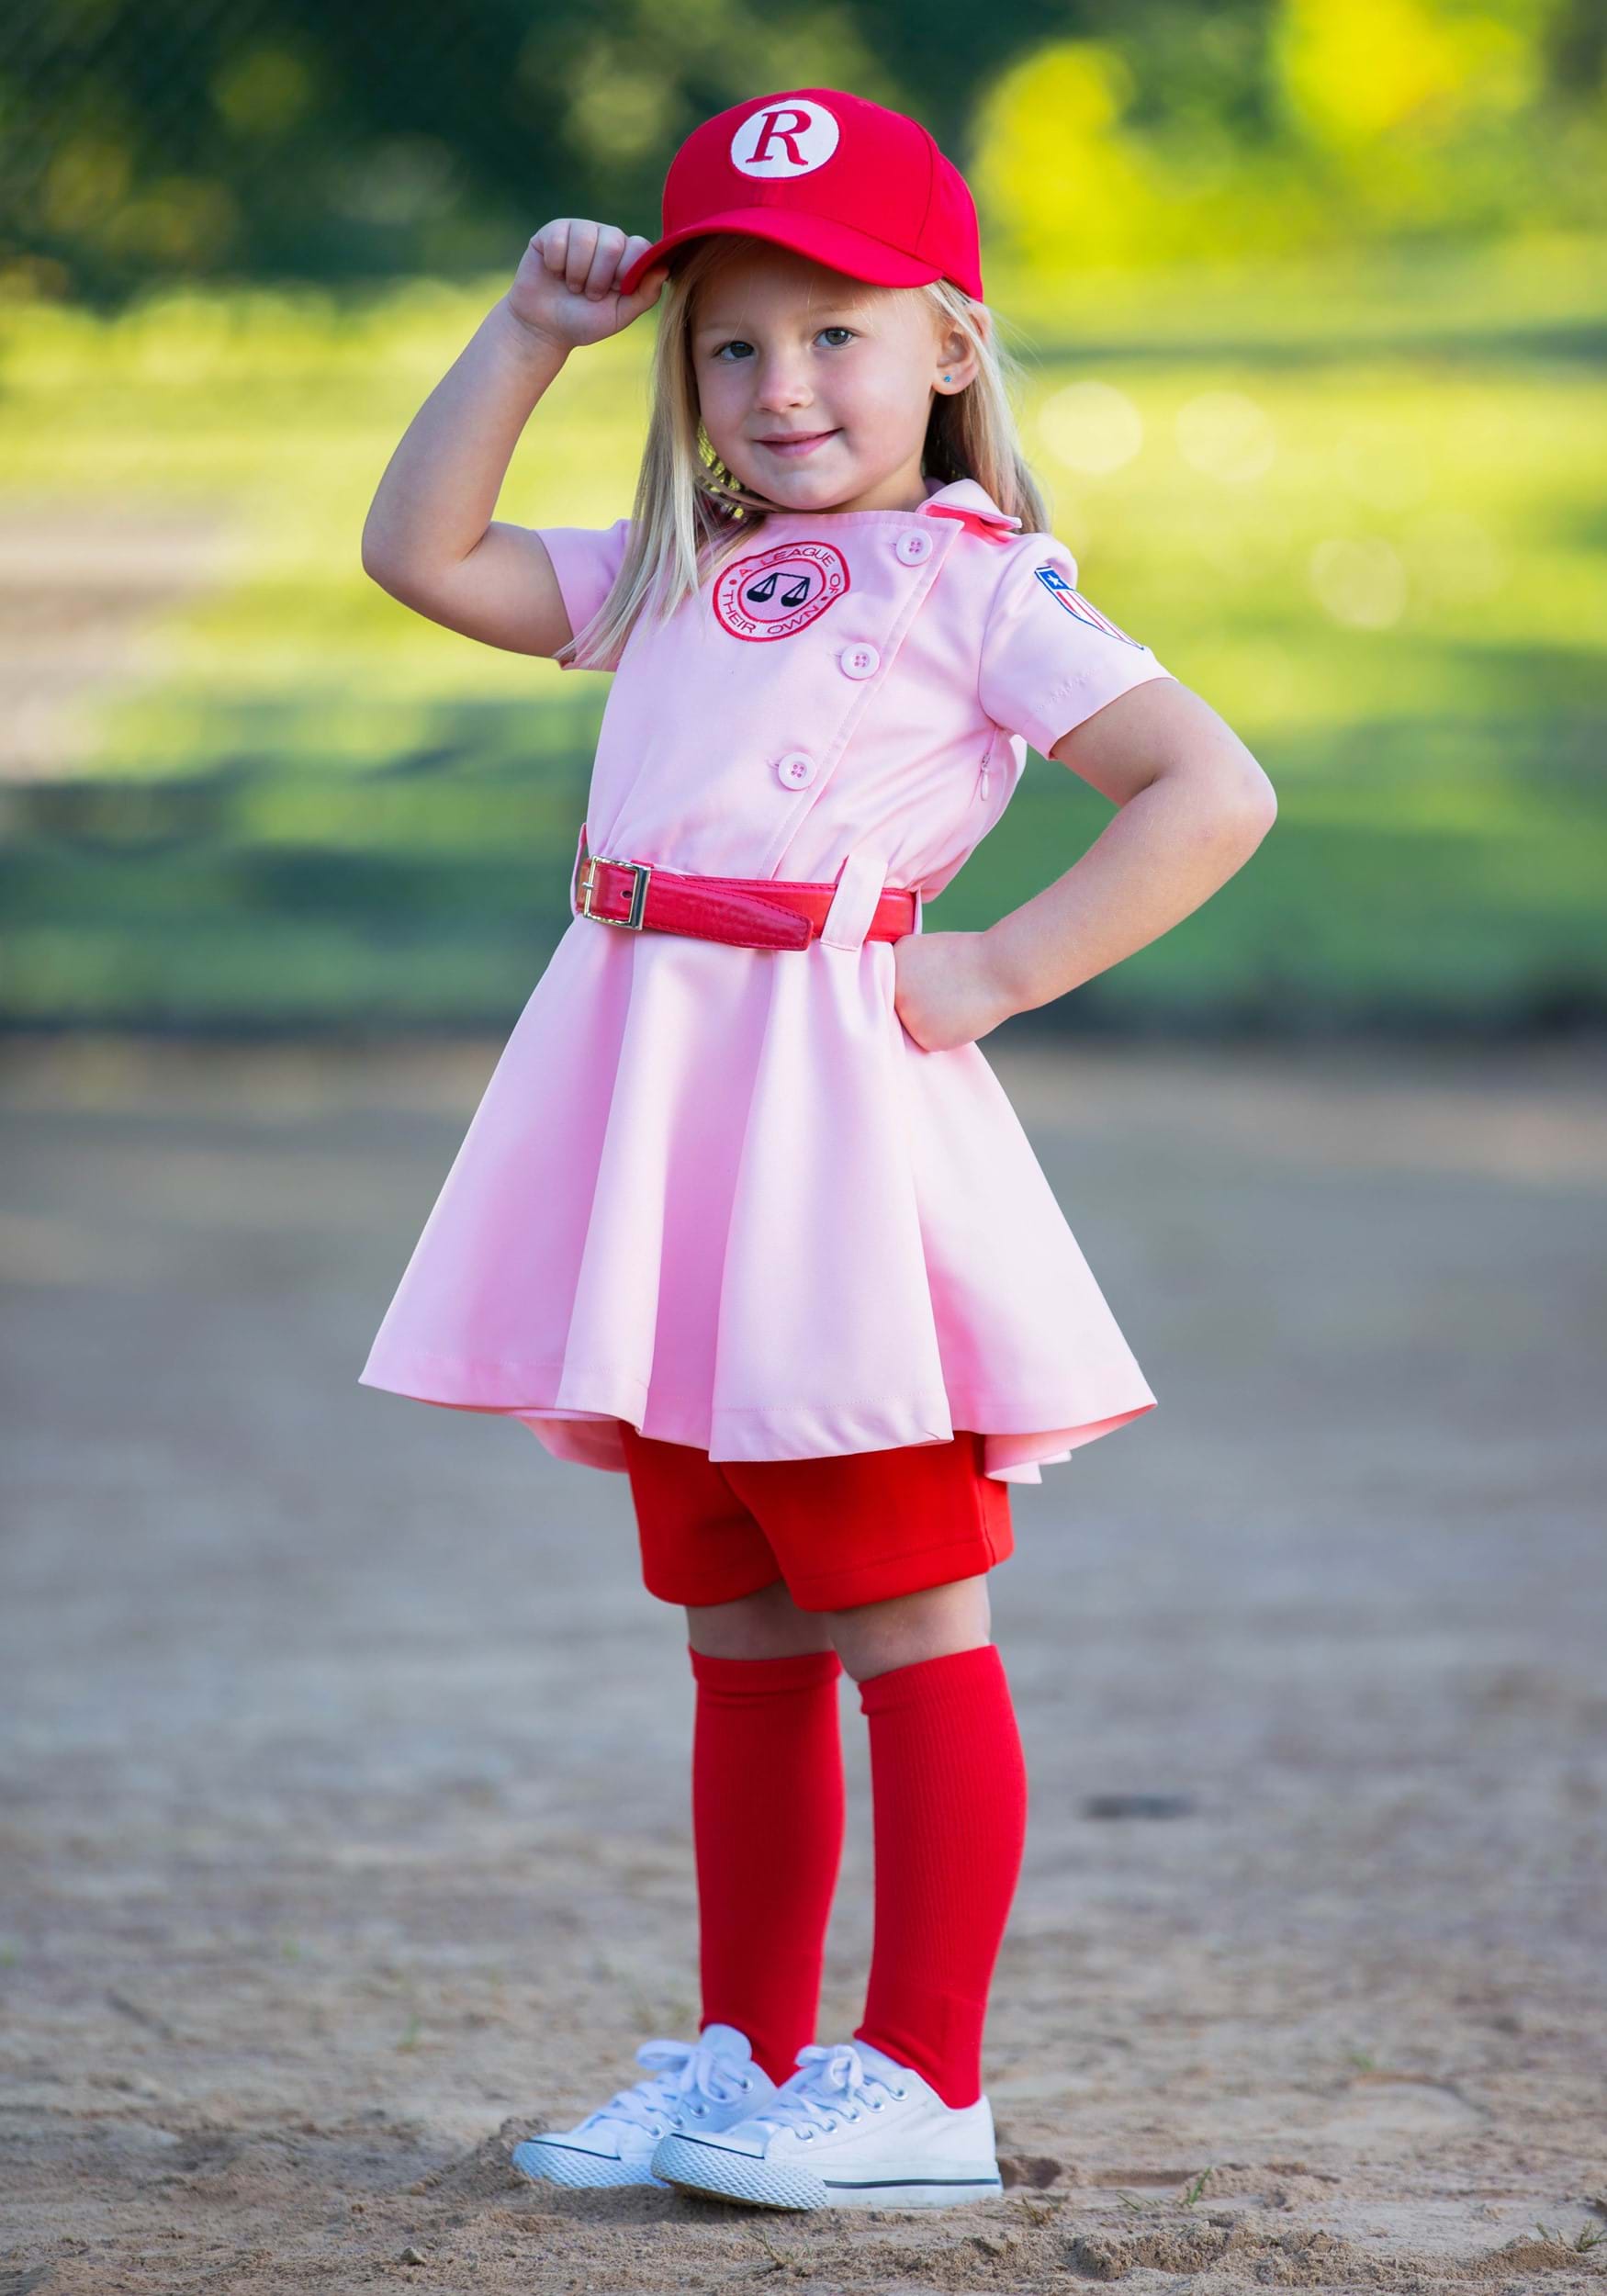 League of Their Own Toddler Dottie Luxury Costume for Girls